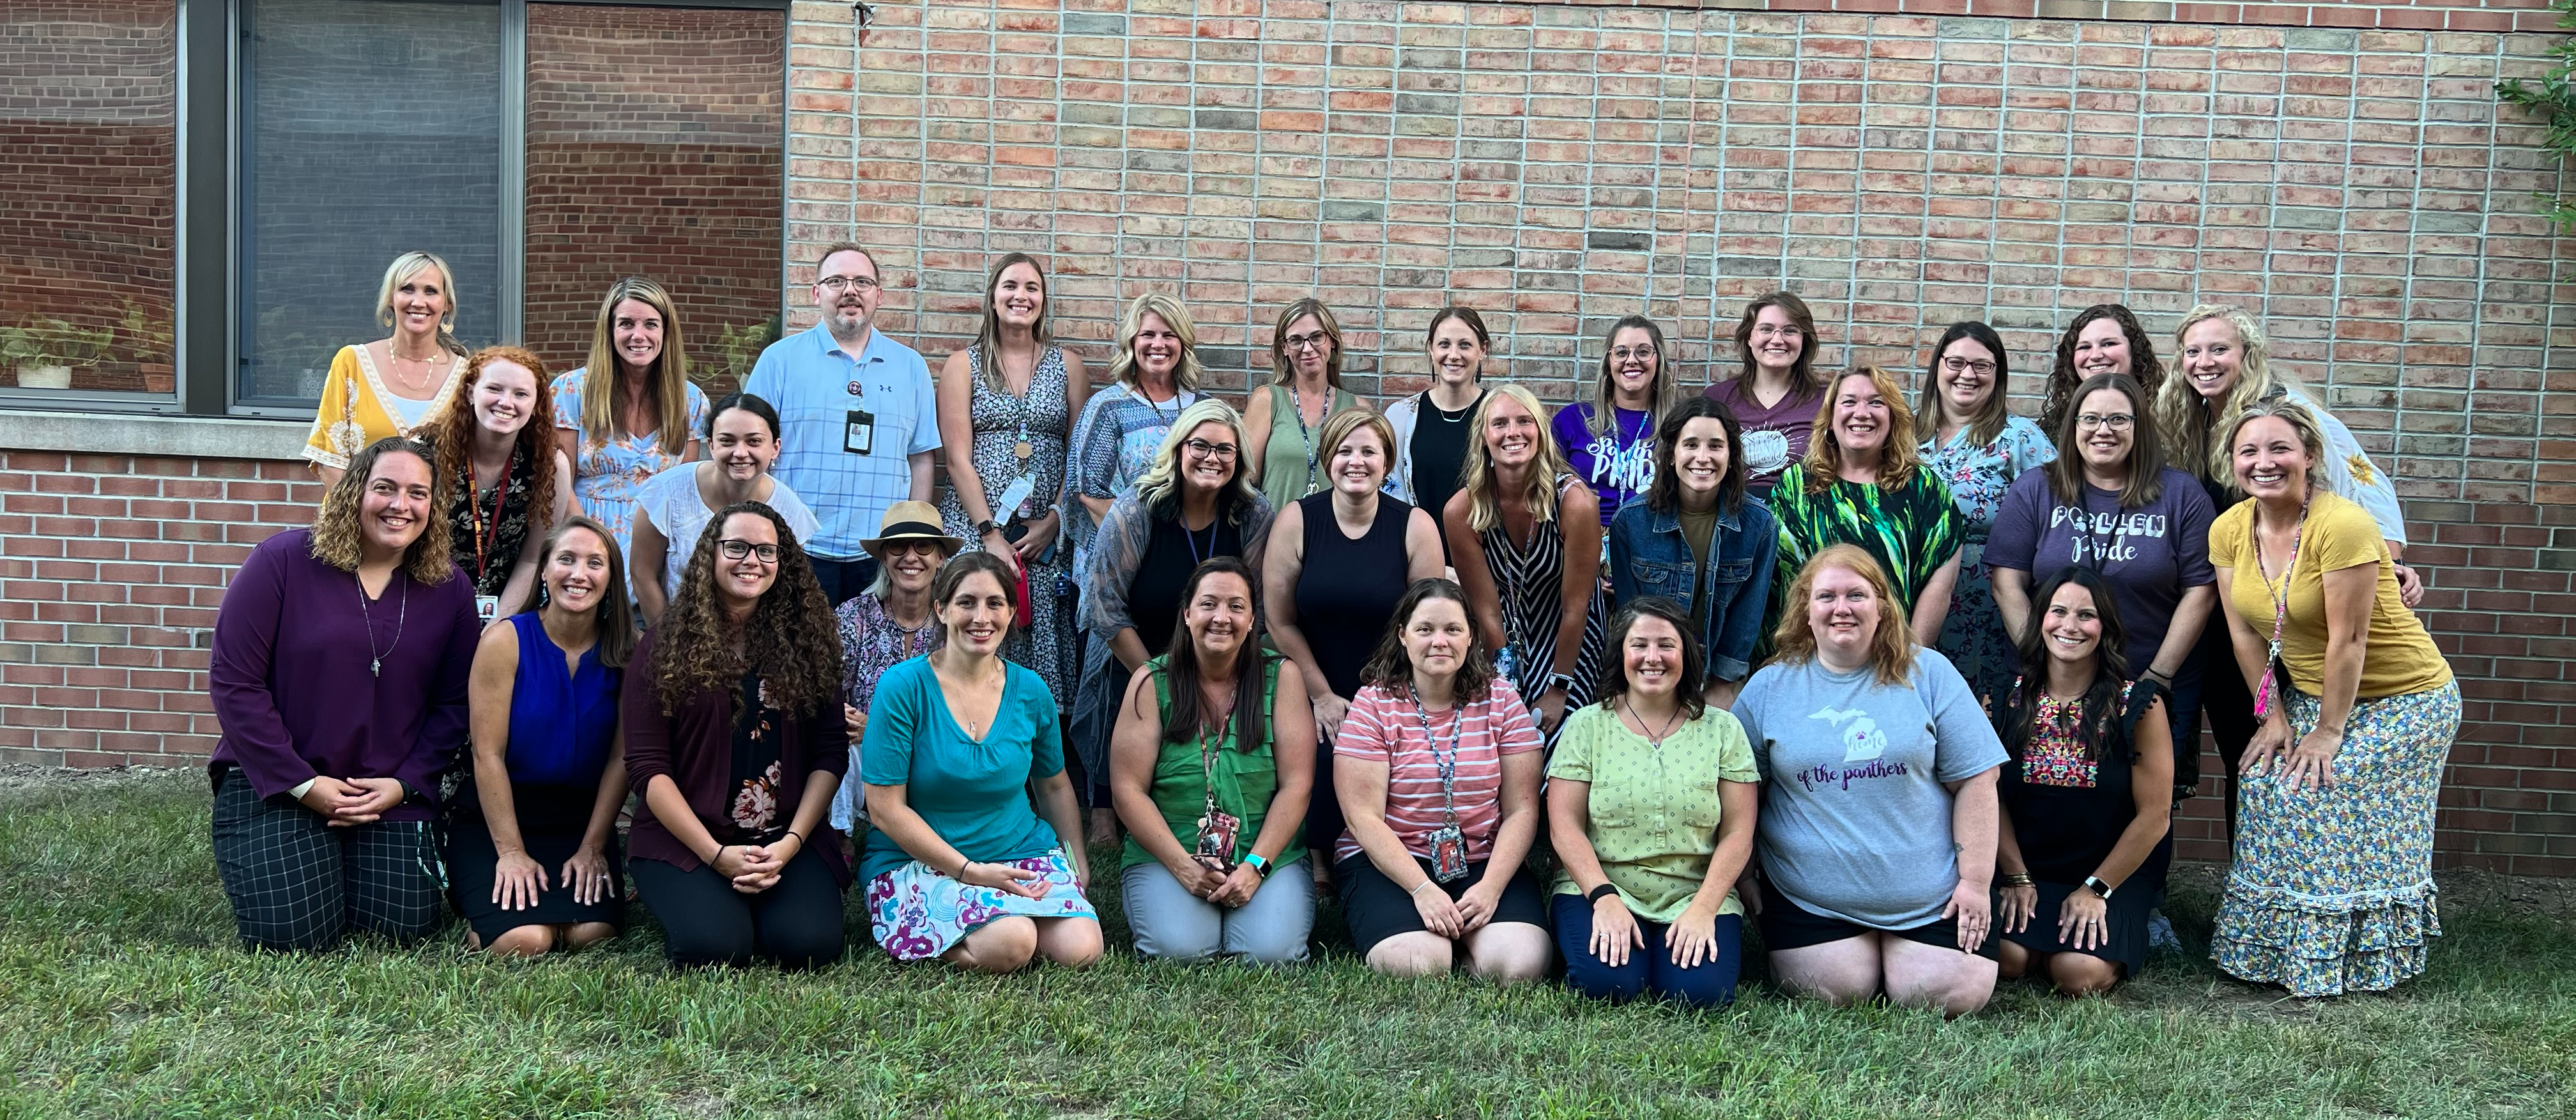 The group of Pullen Teachers posing outside the school building.